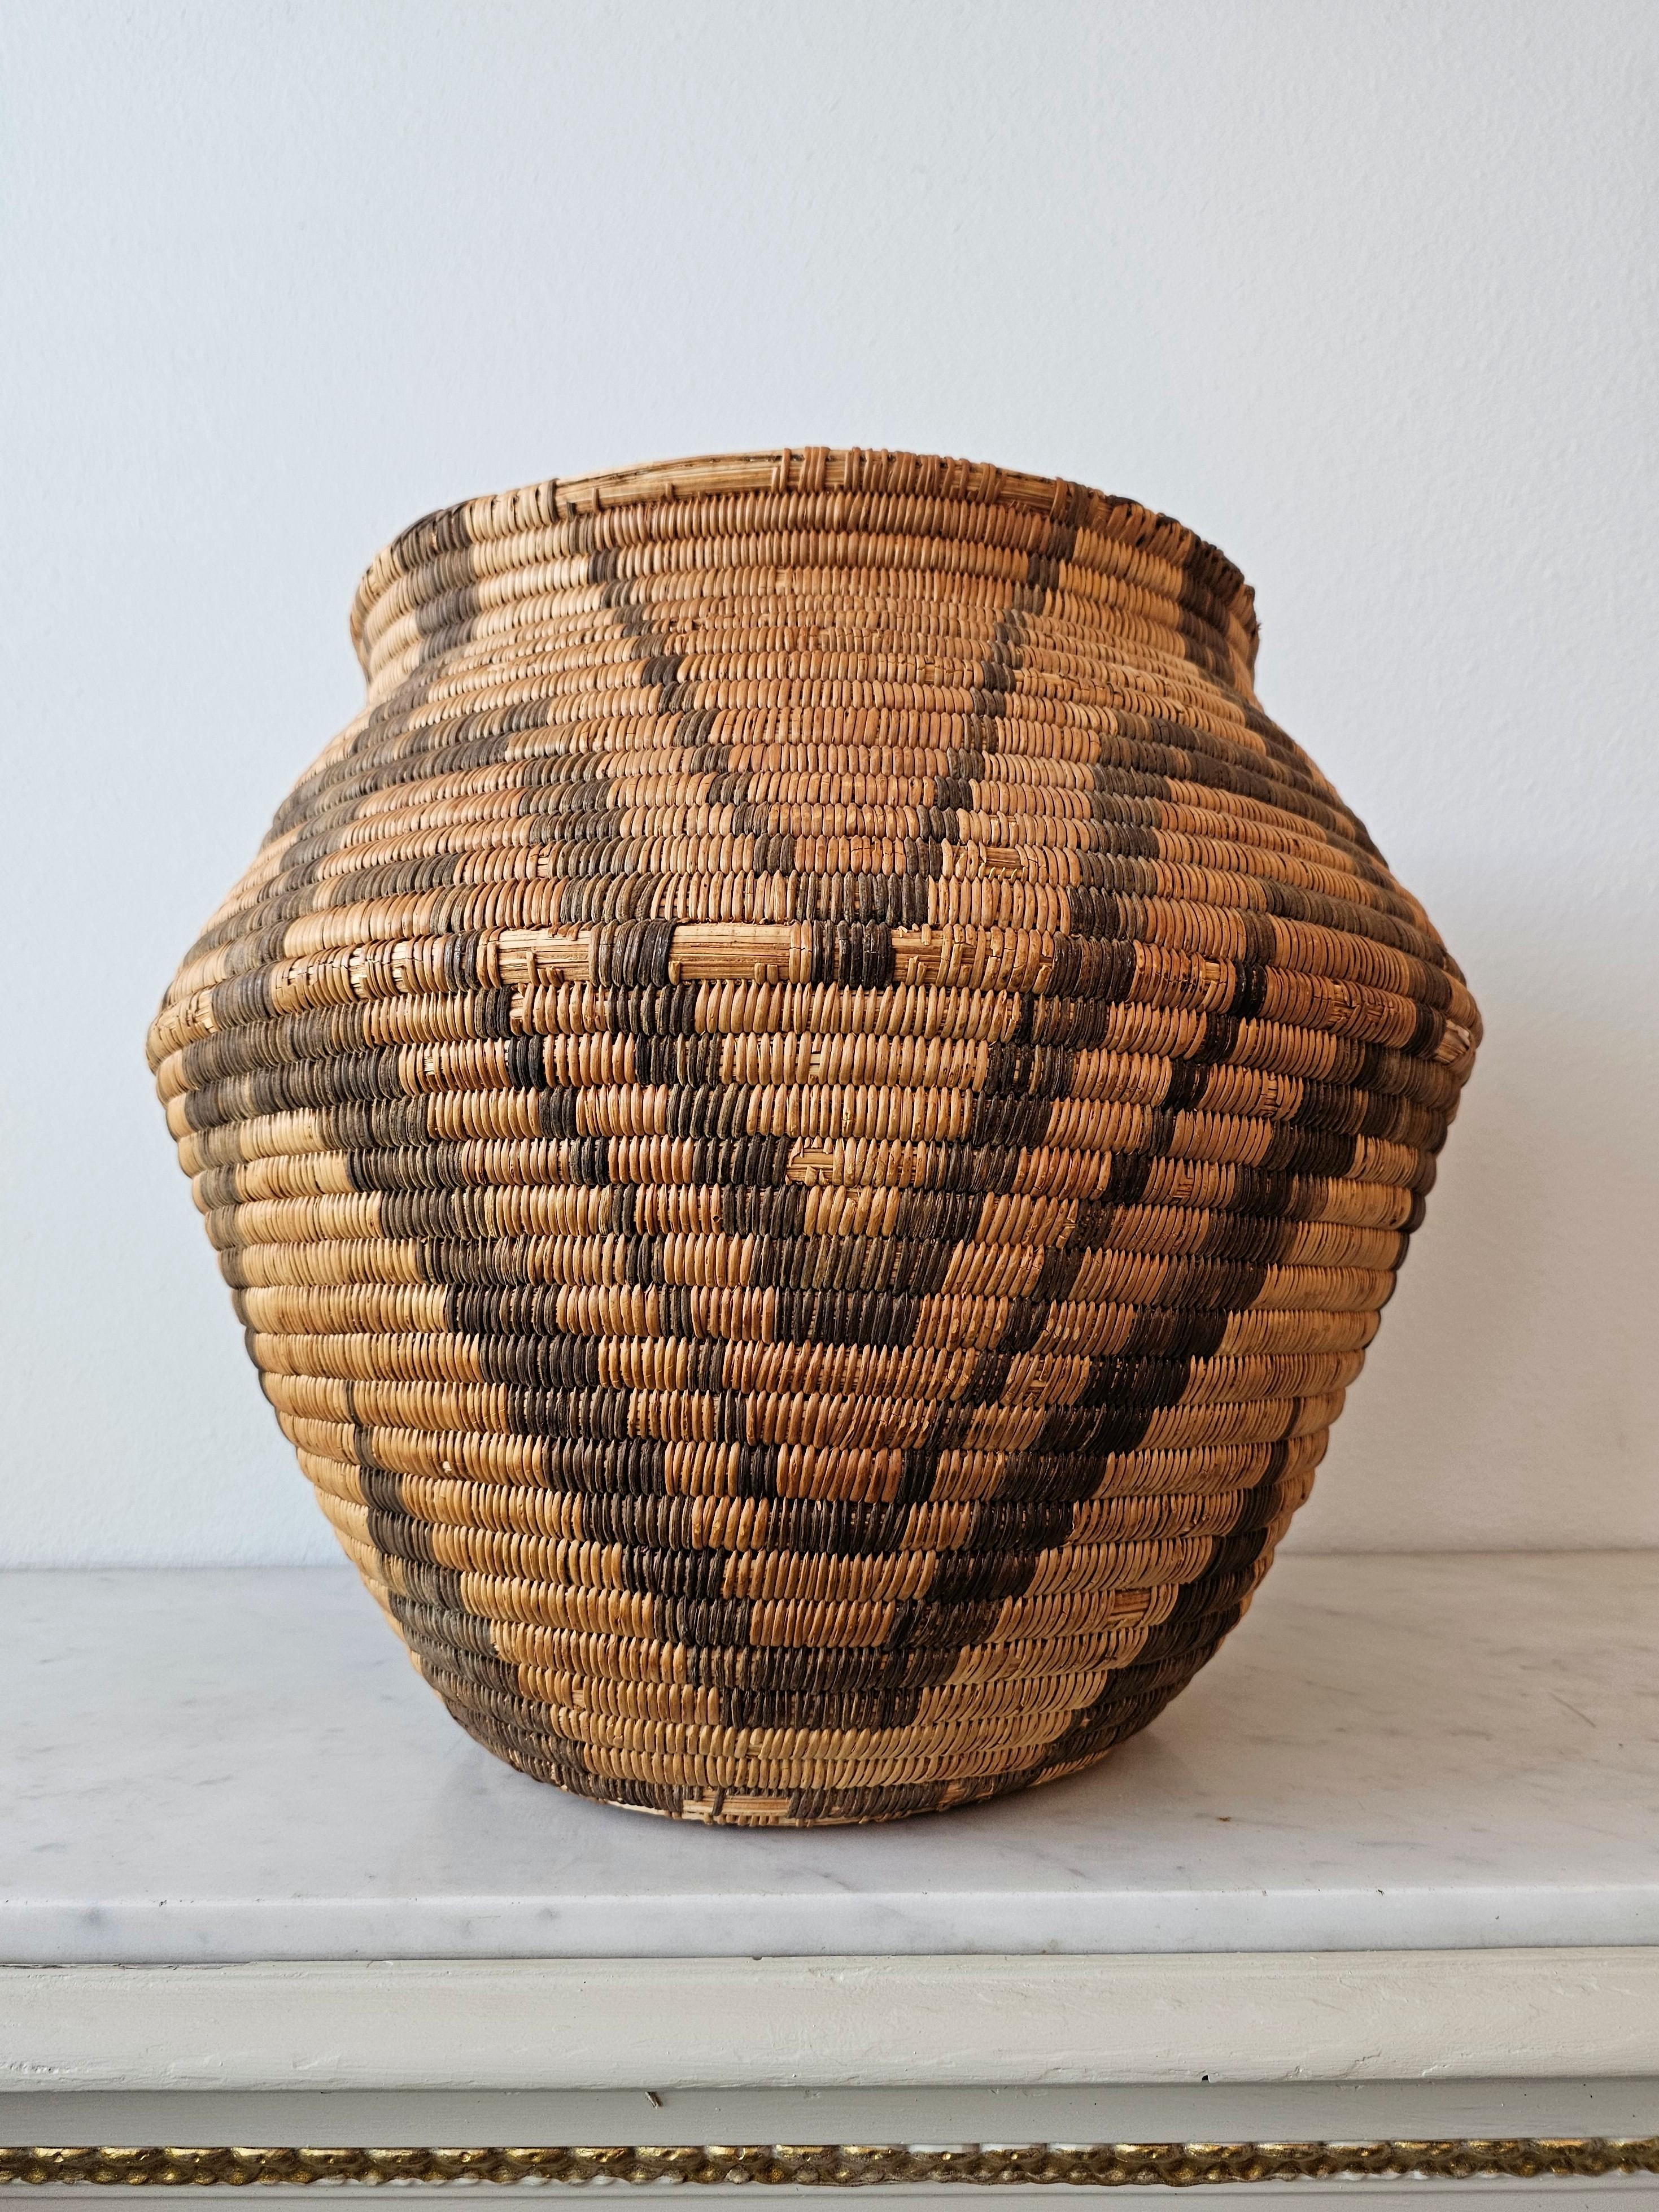 Natural Fiber Antique Apache Olla Jar Coiled Willow Wicker Devil's Claw Basket  For Sale